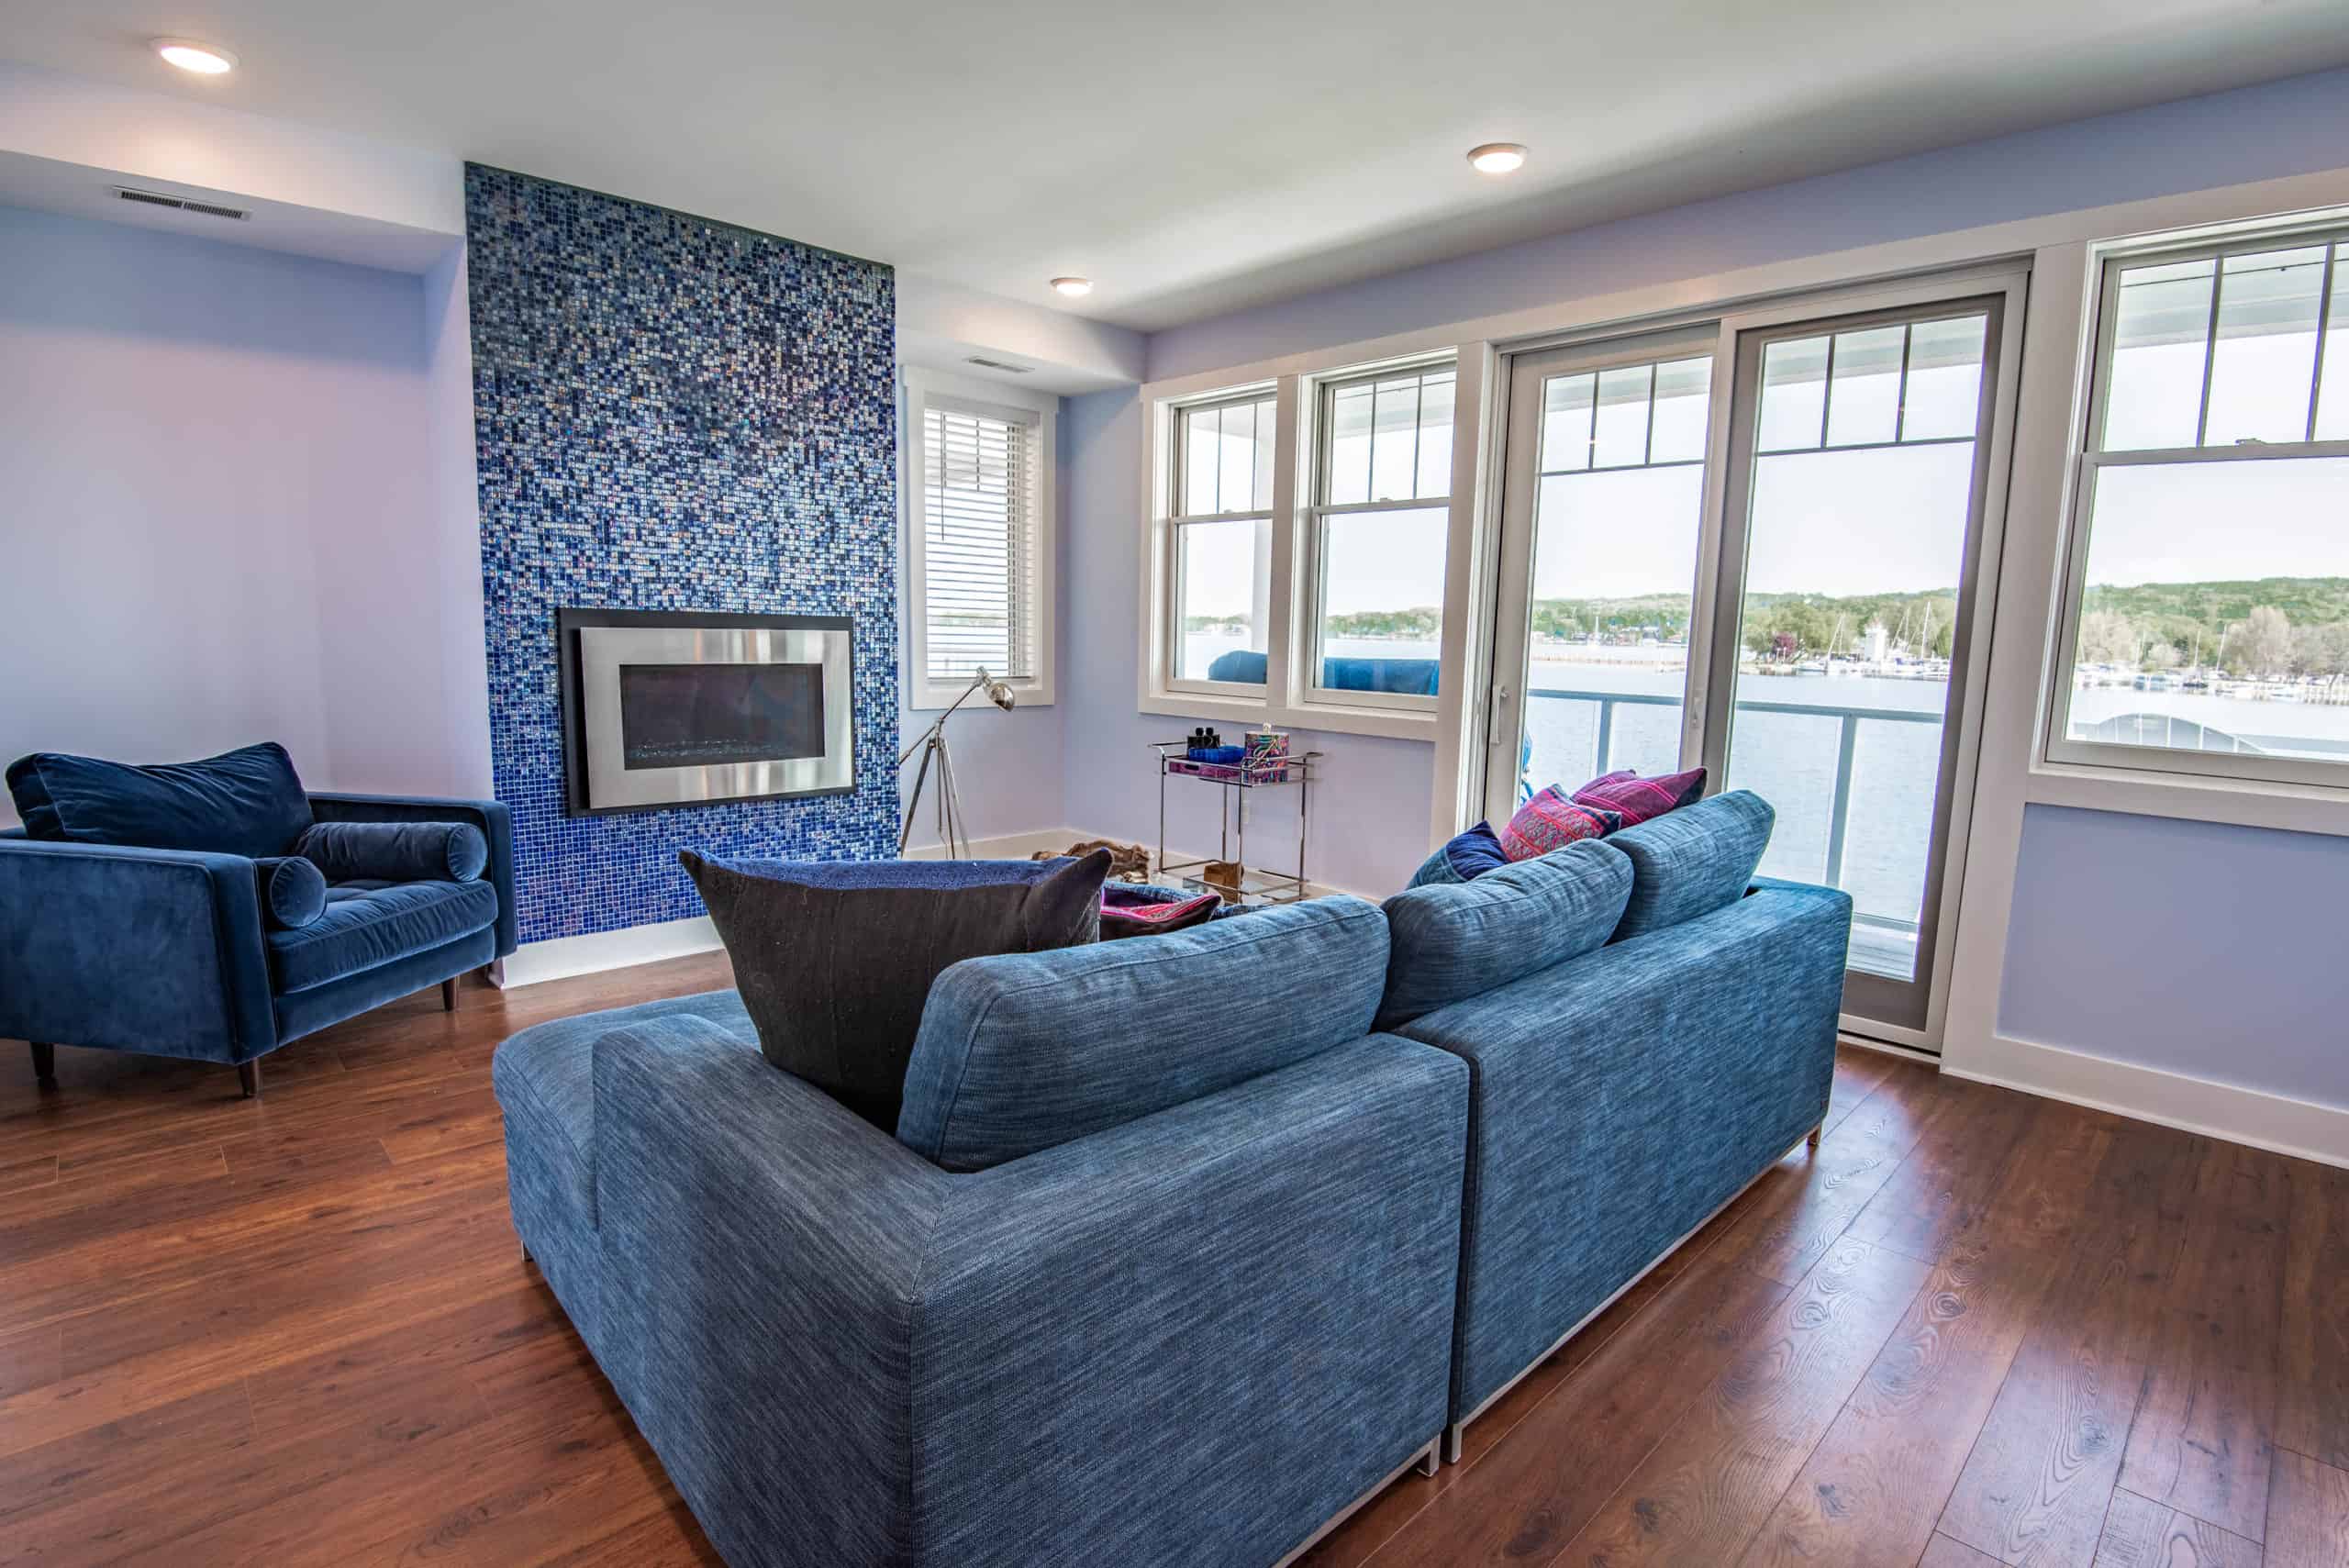 Sapphire Skies Condo is a vacation rental in Boyne City, Michigan on Lake Charlevoix